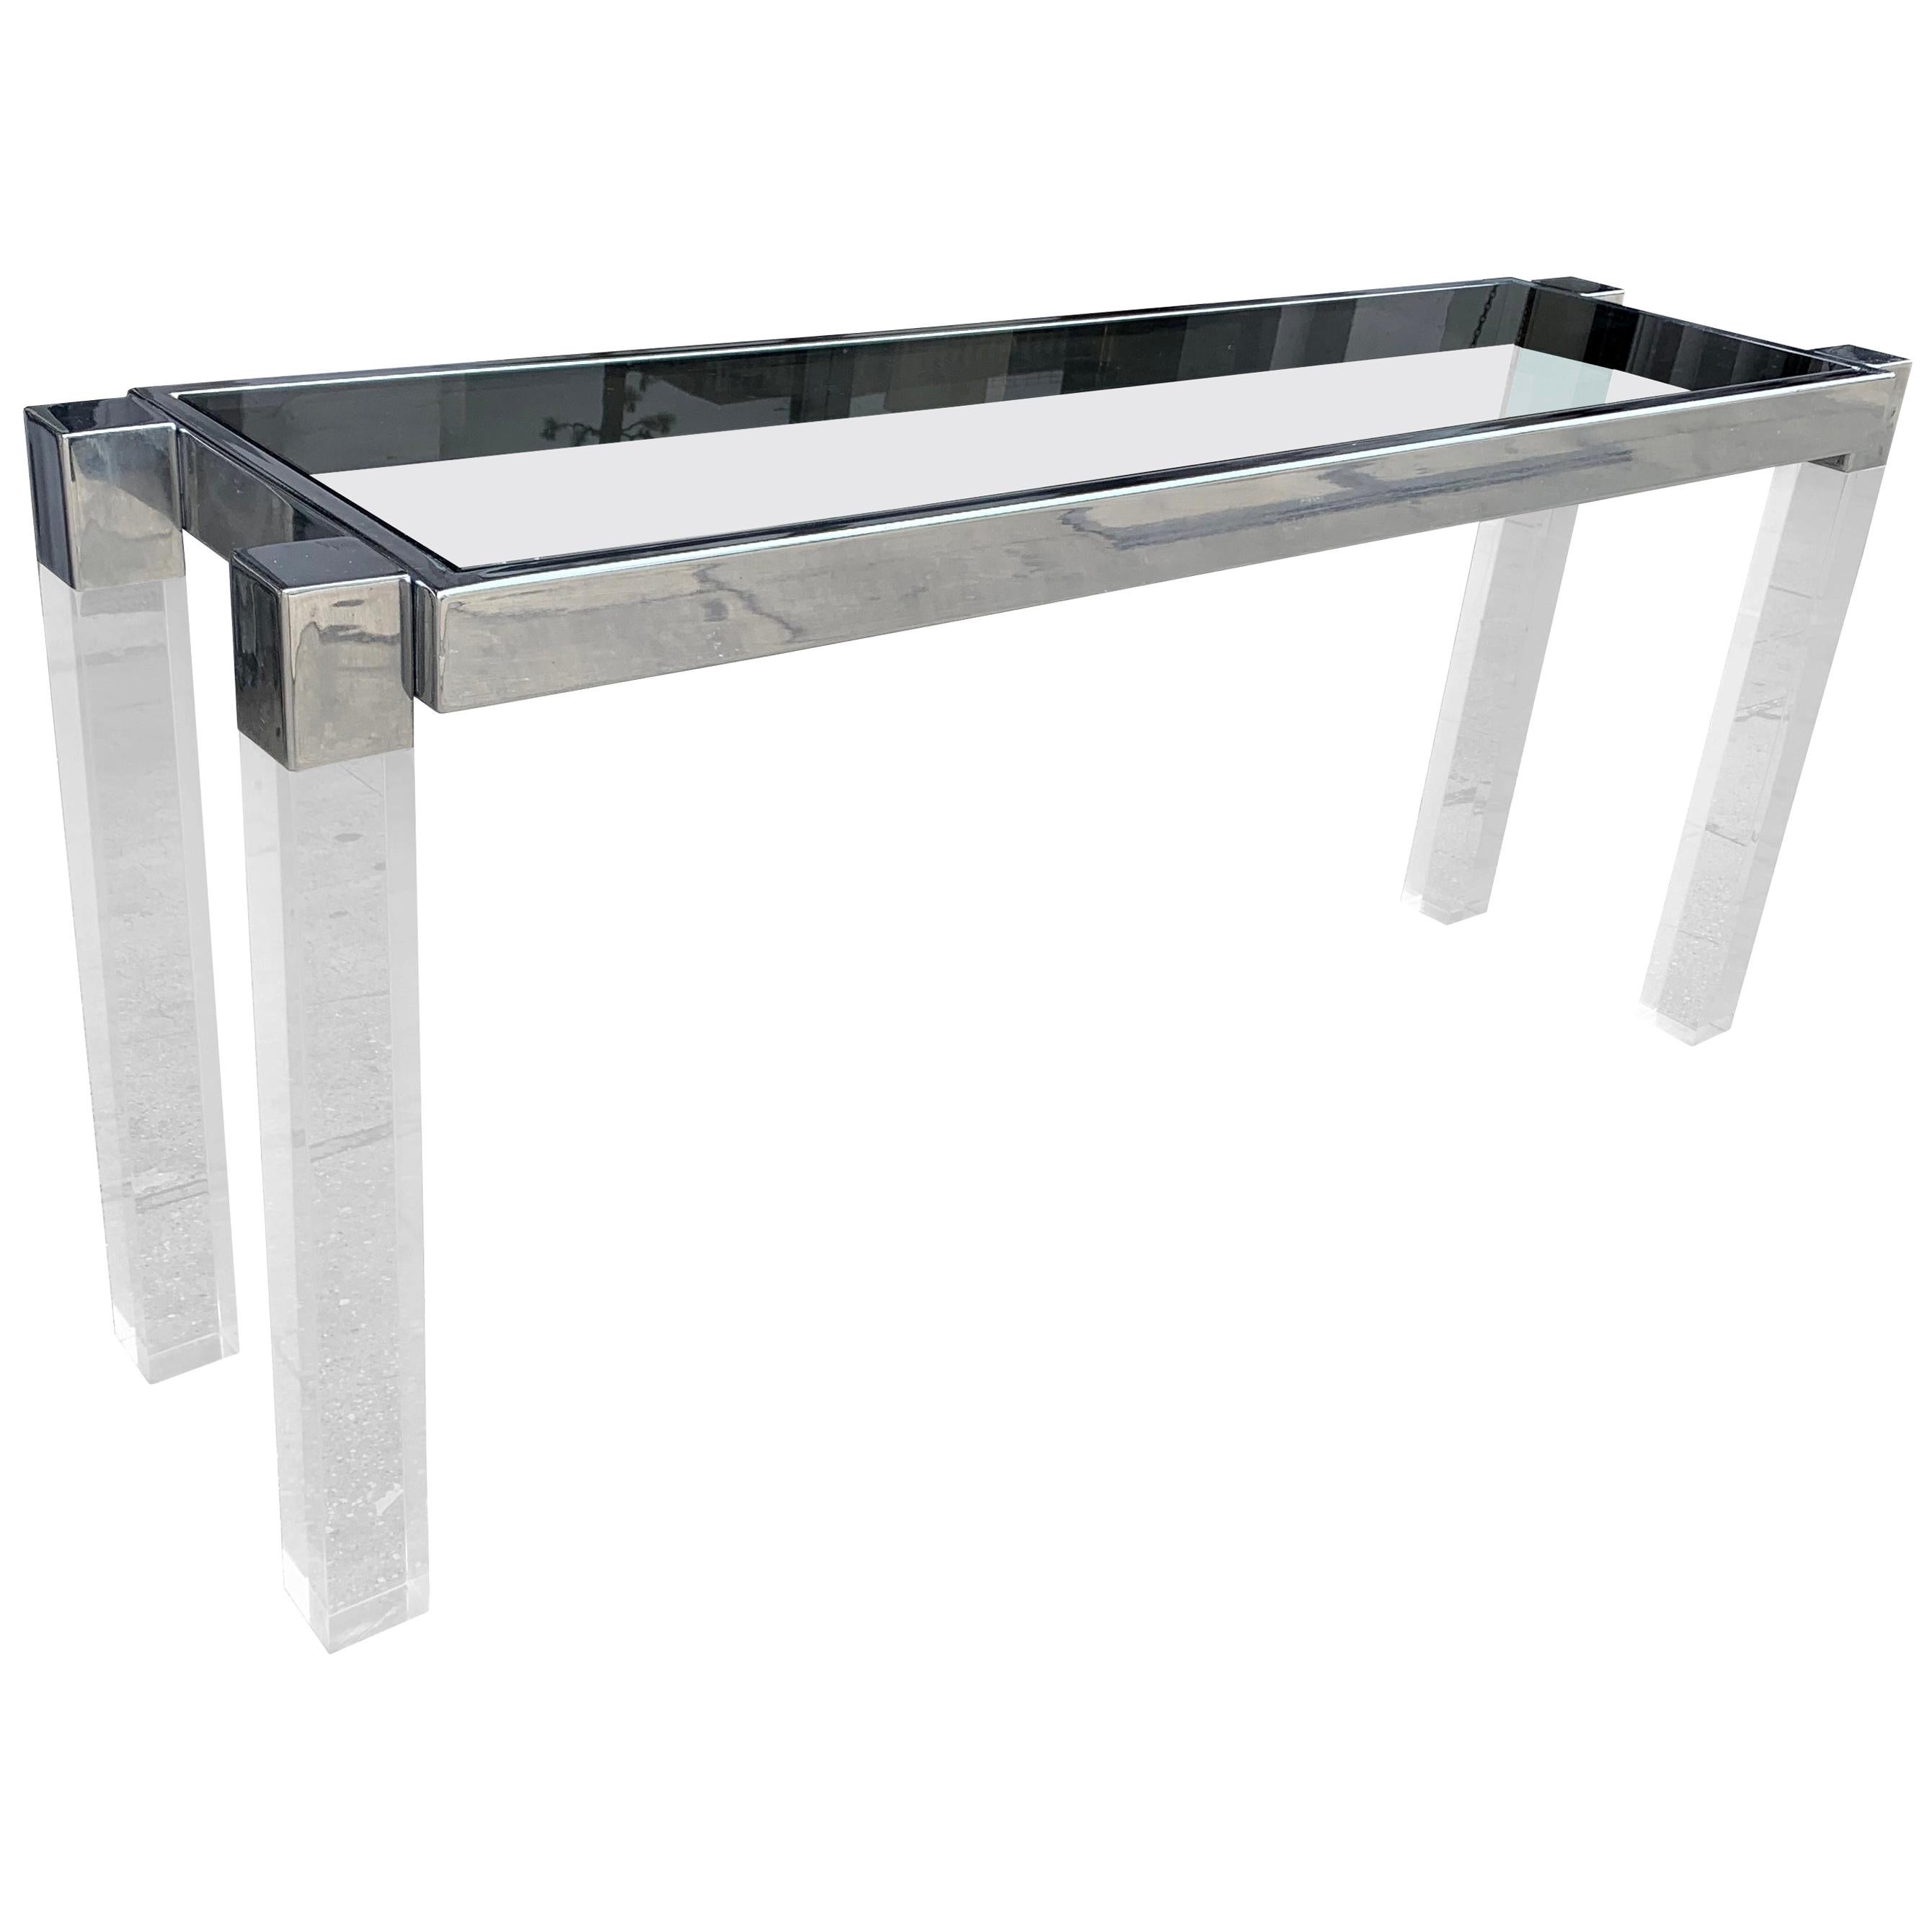 Charles Hollis Jones "Box Line" Console Table in Lucite and Polished Nickel